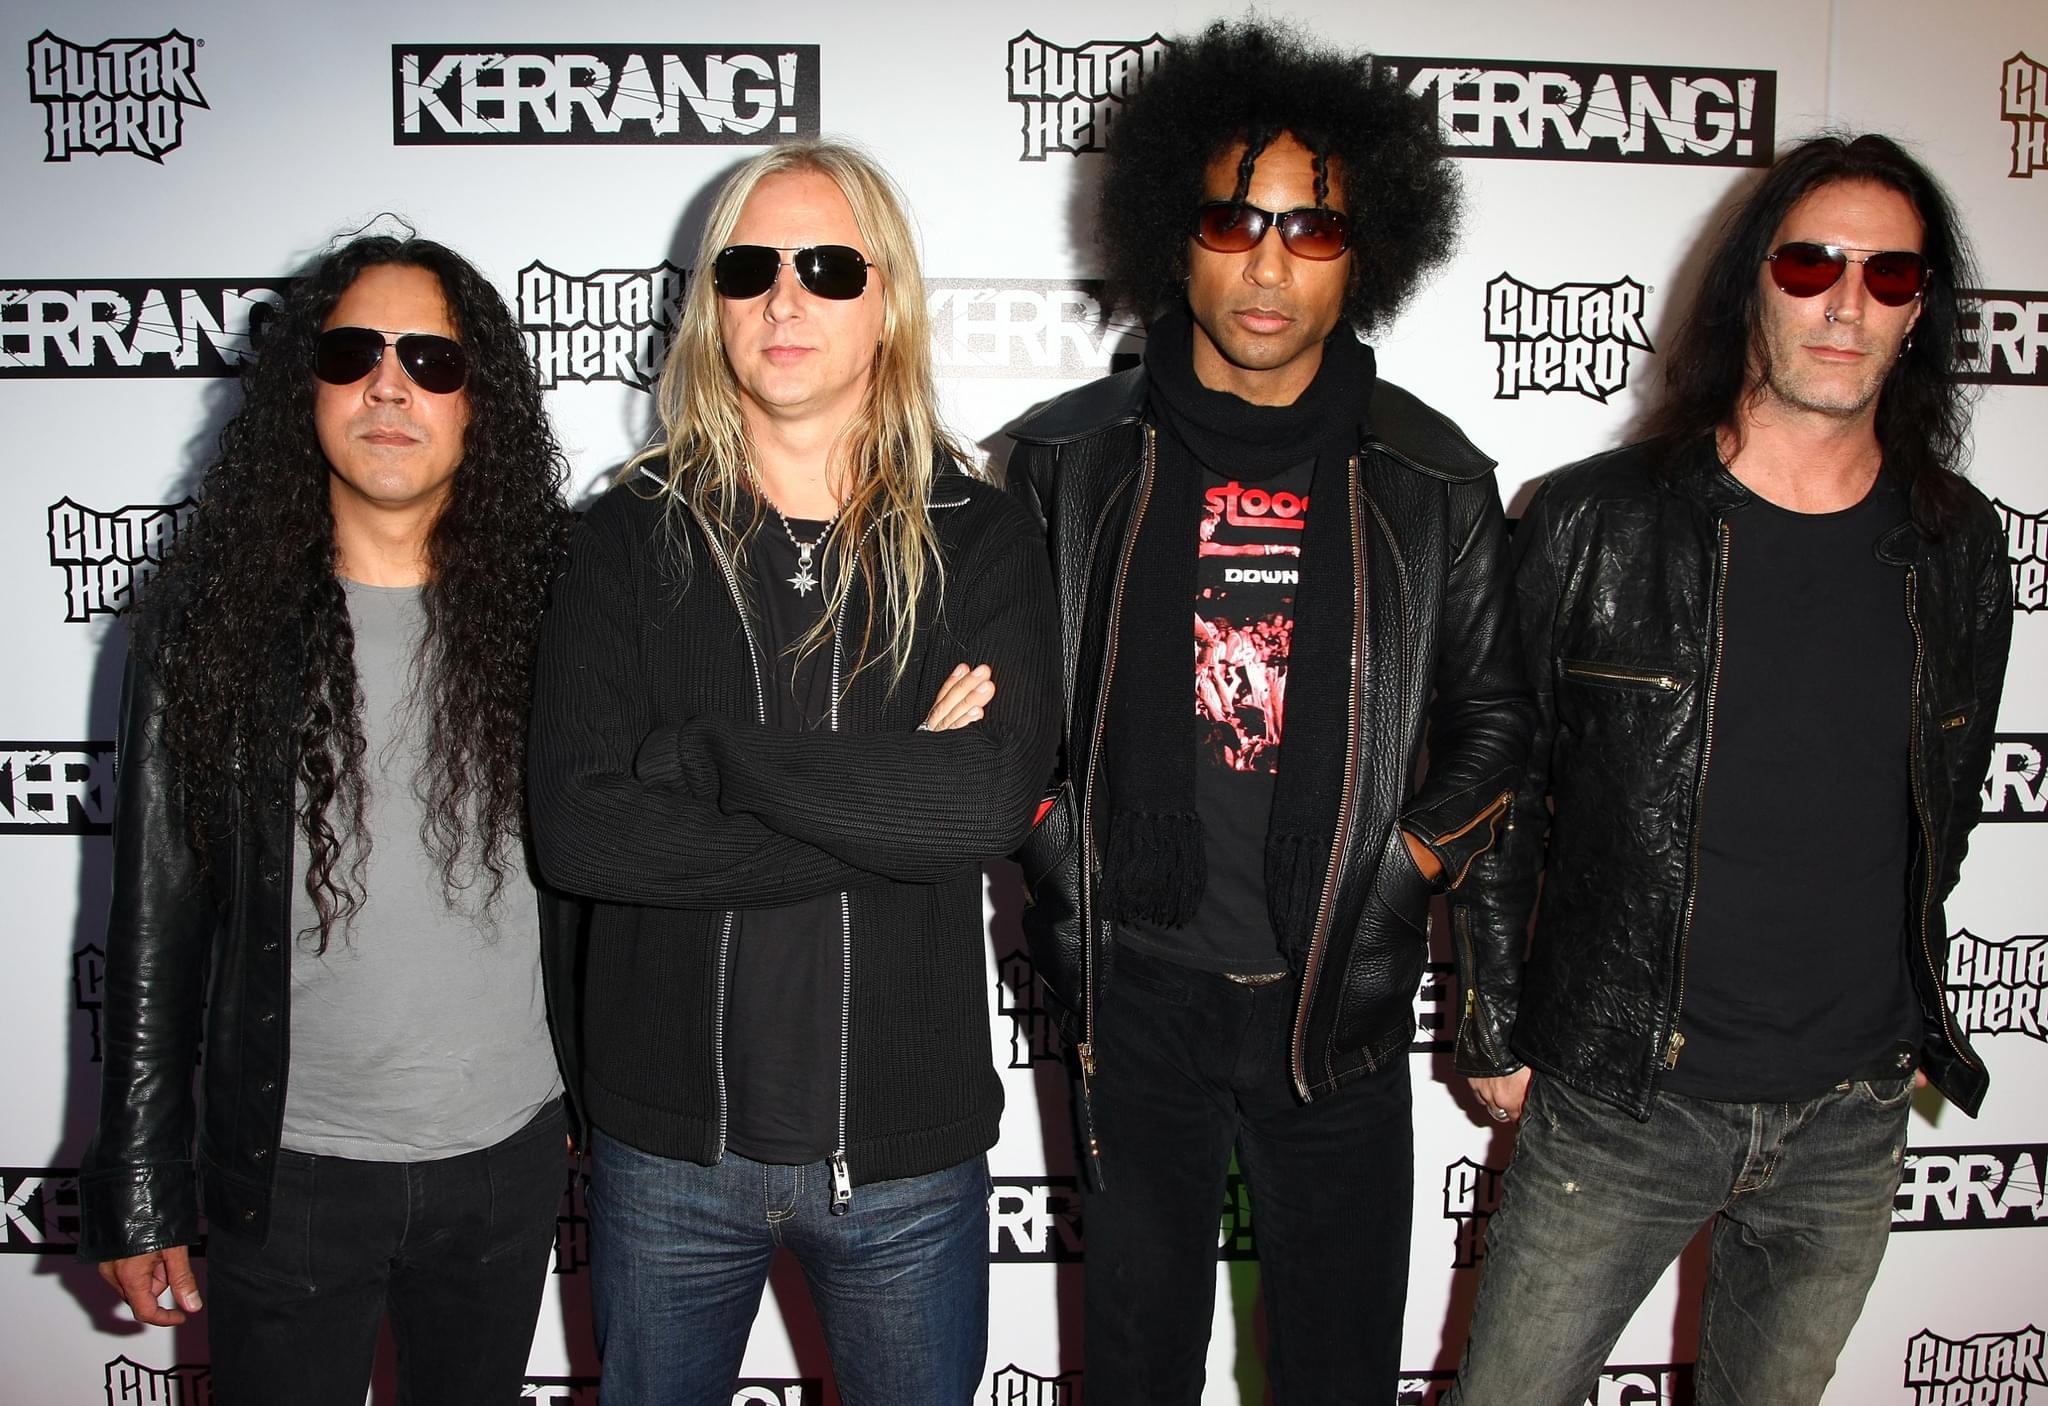 Alice In Chains, Highly anticipated album, August release date, Rock 1005 WNNX FM news, 2050x1410 HD Desktop